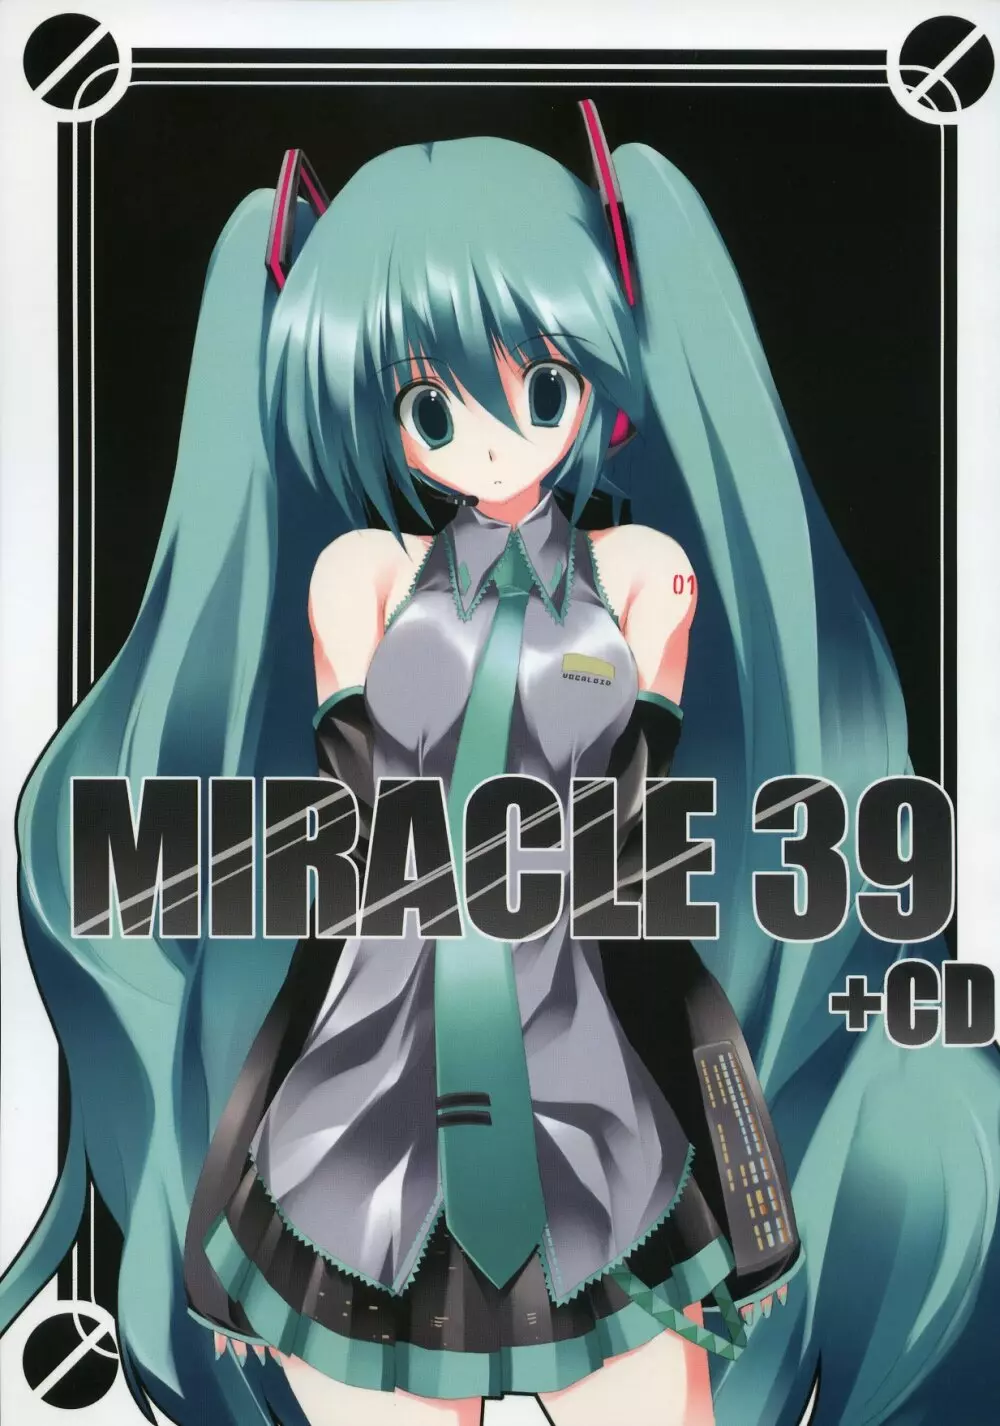 MIRACLE 39 +CD - page1